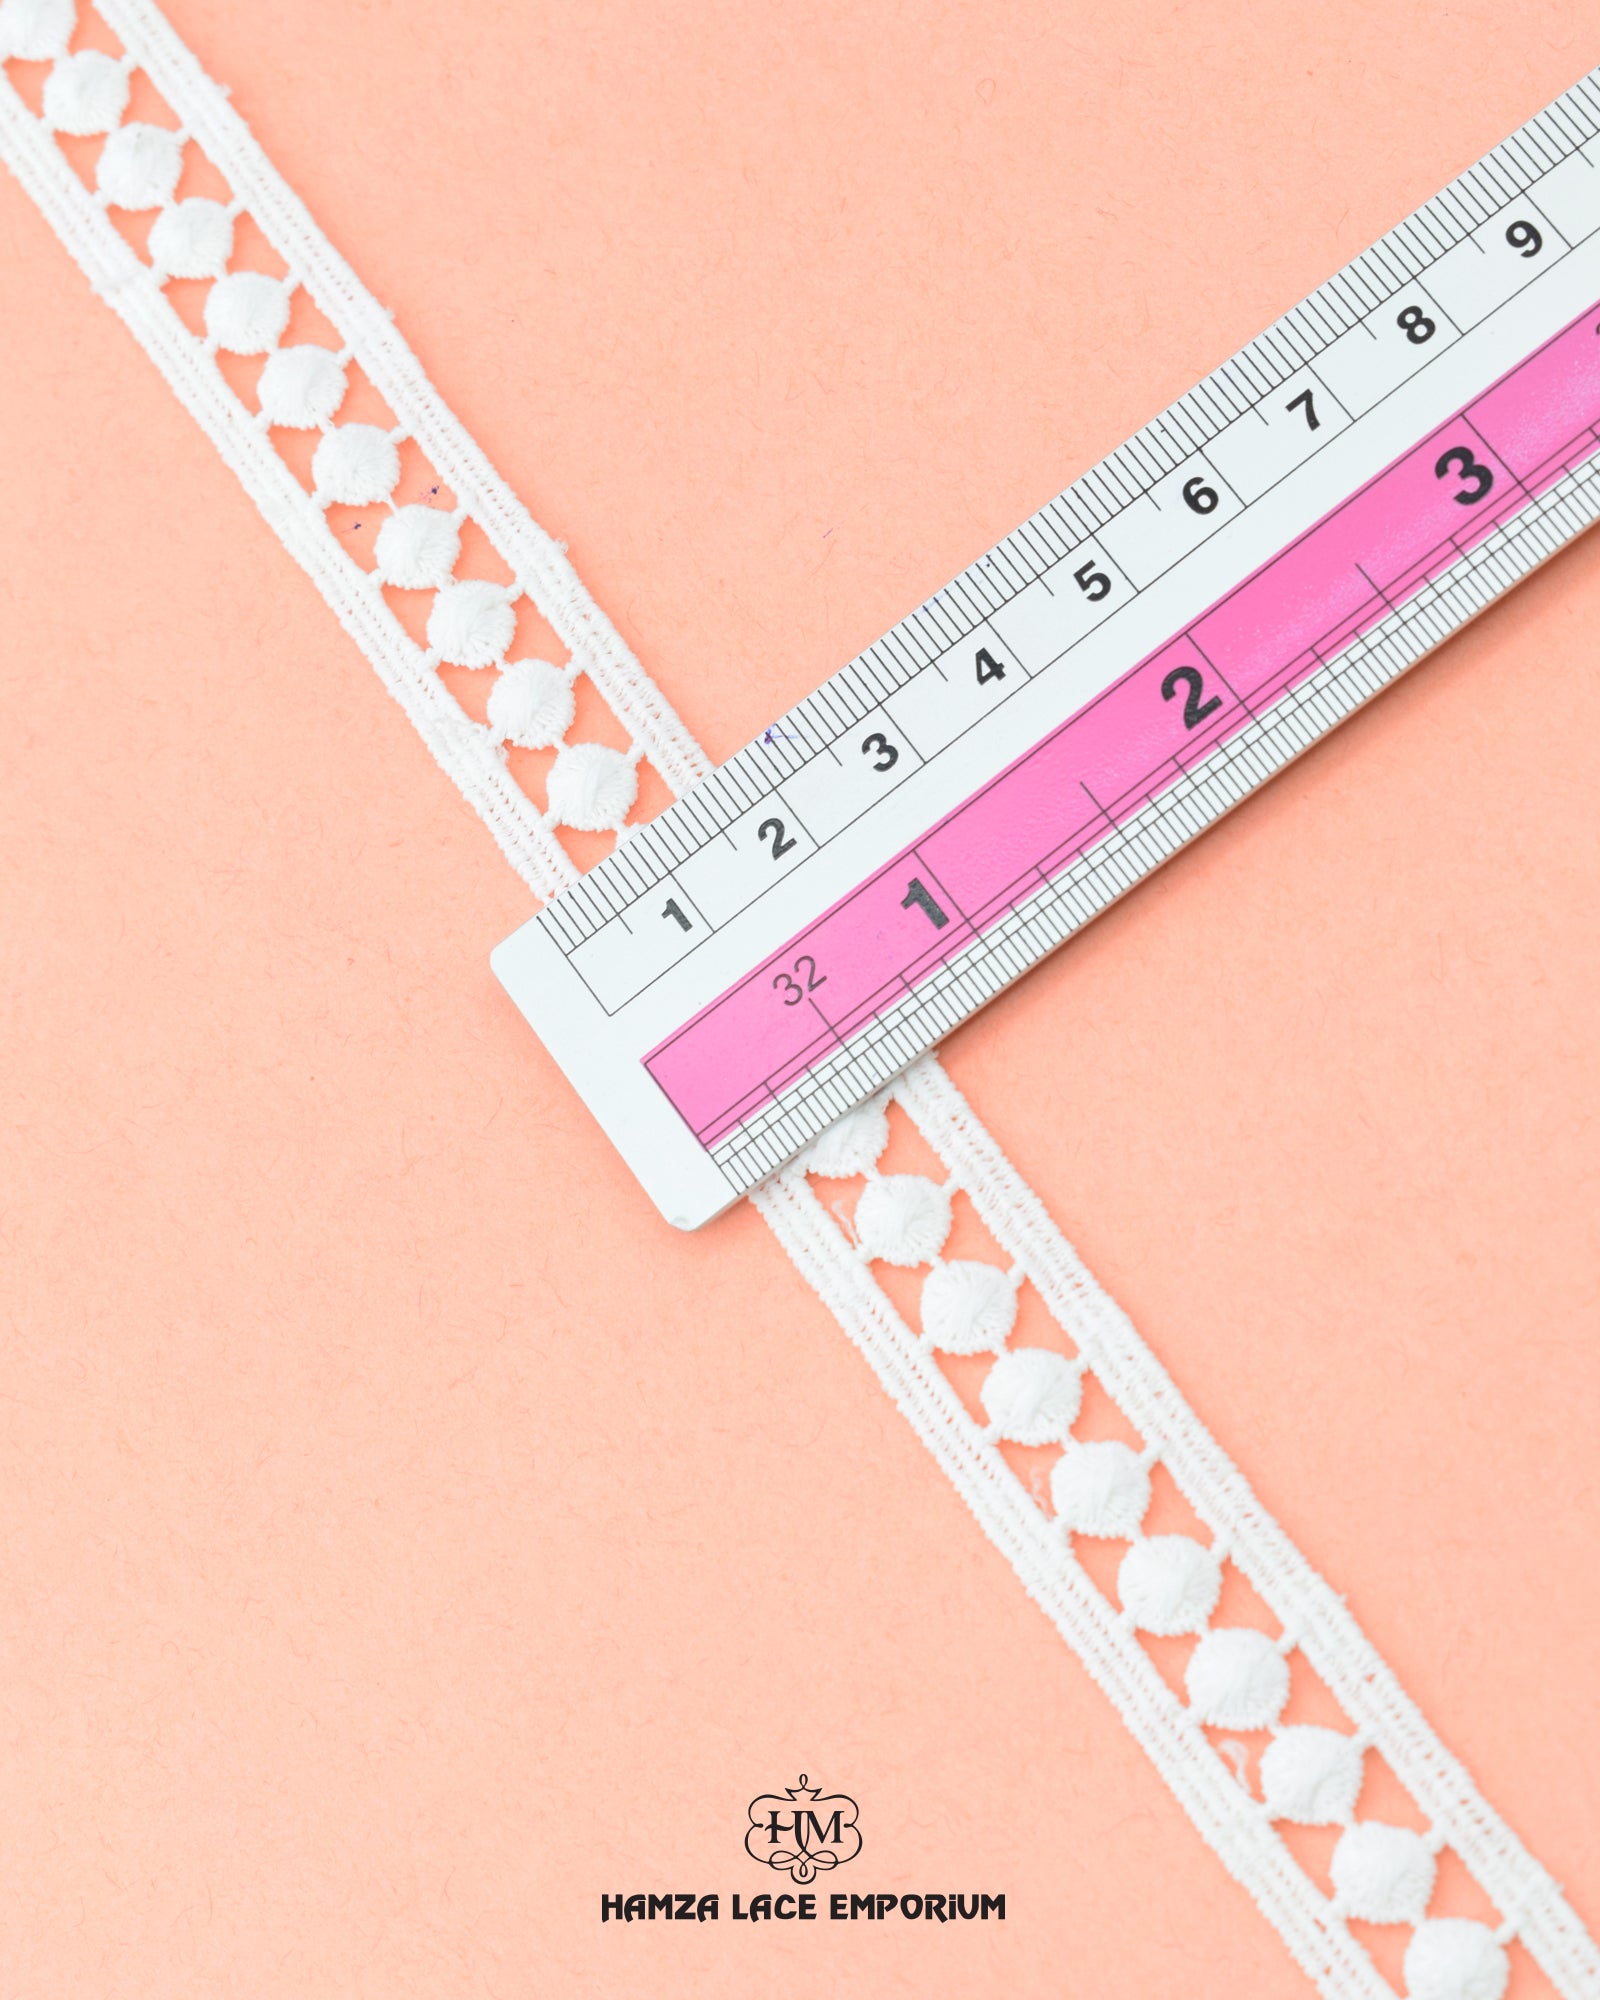 Center Filling Lace 5490 showcased alongside a ruler, revealing a width of 0.75 inches.